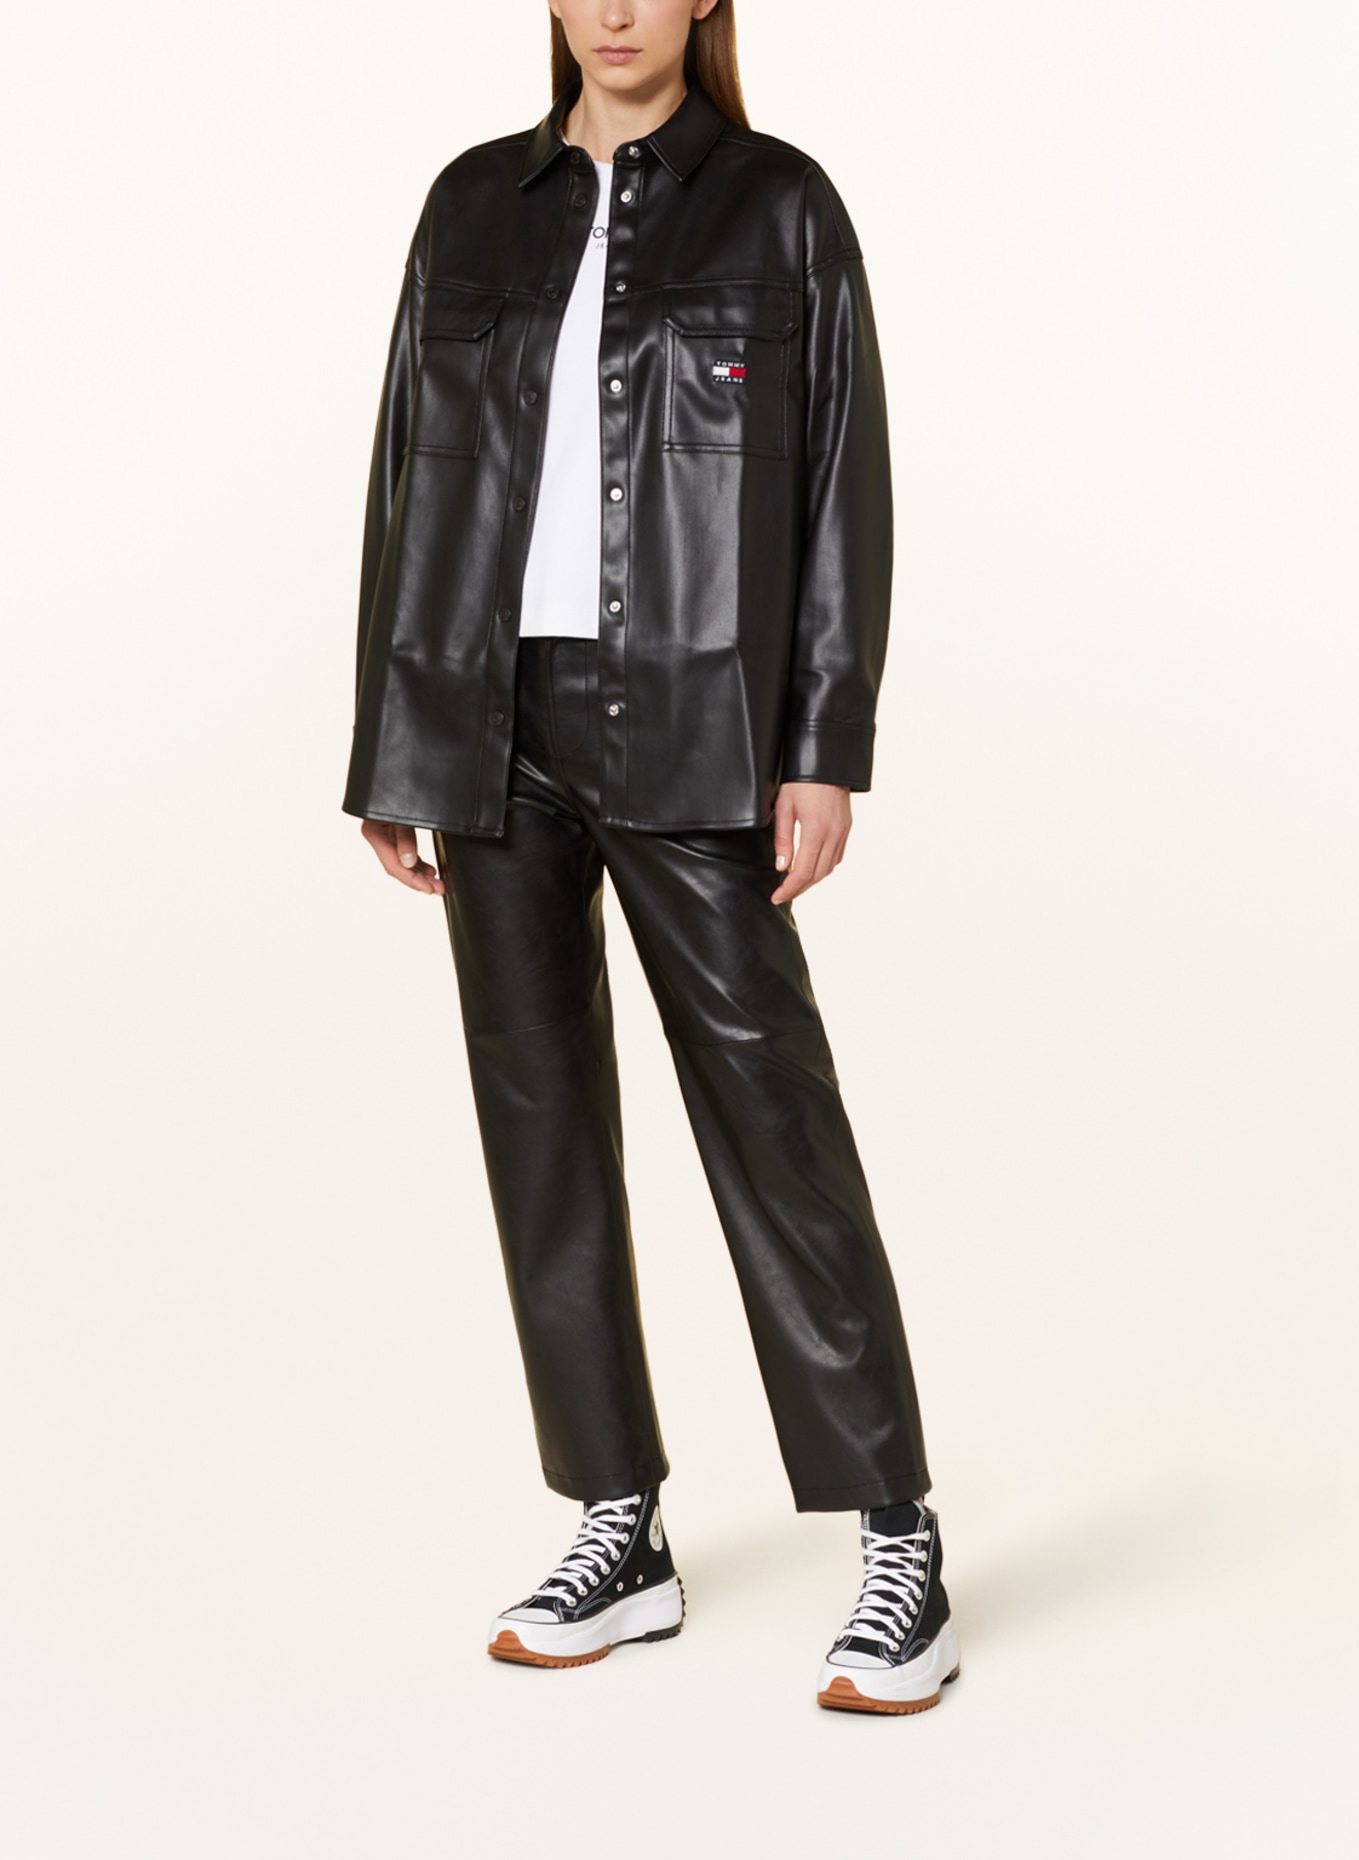 Overshirt in leather in look TOMMY black JEANS